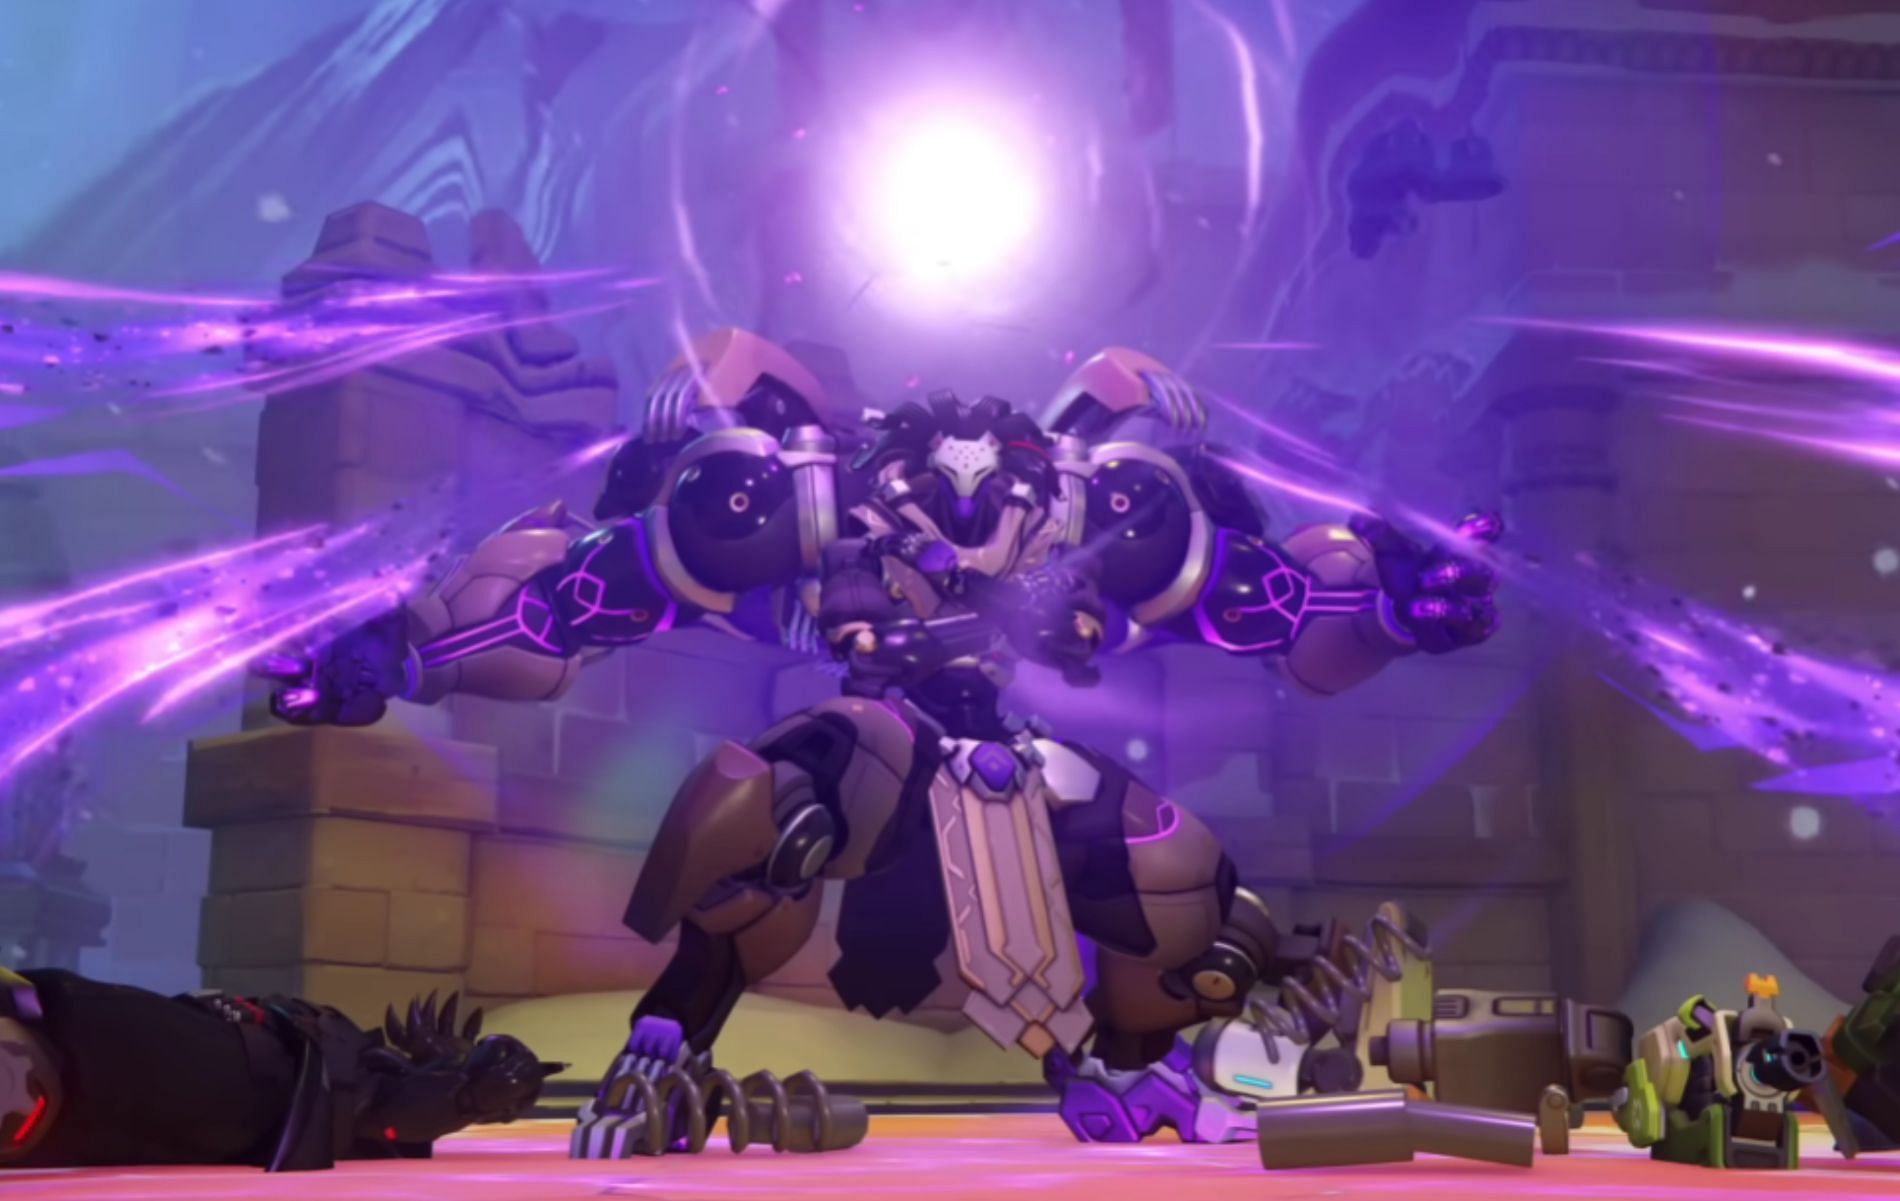 Ramattra is set to receive a much-needed power-deducting change to his Ultimate in Overwatch 2 (Image via Blizzard)